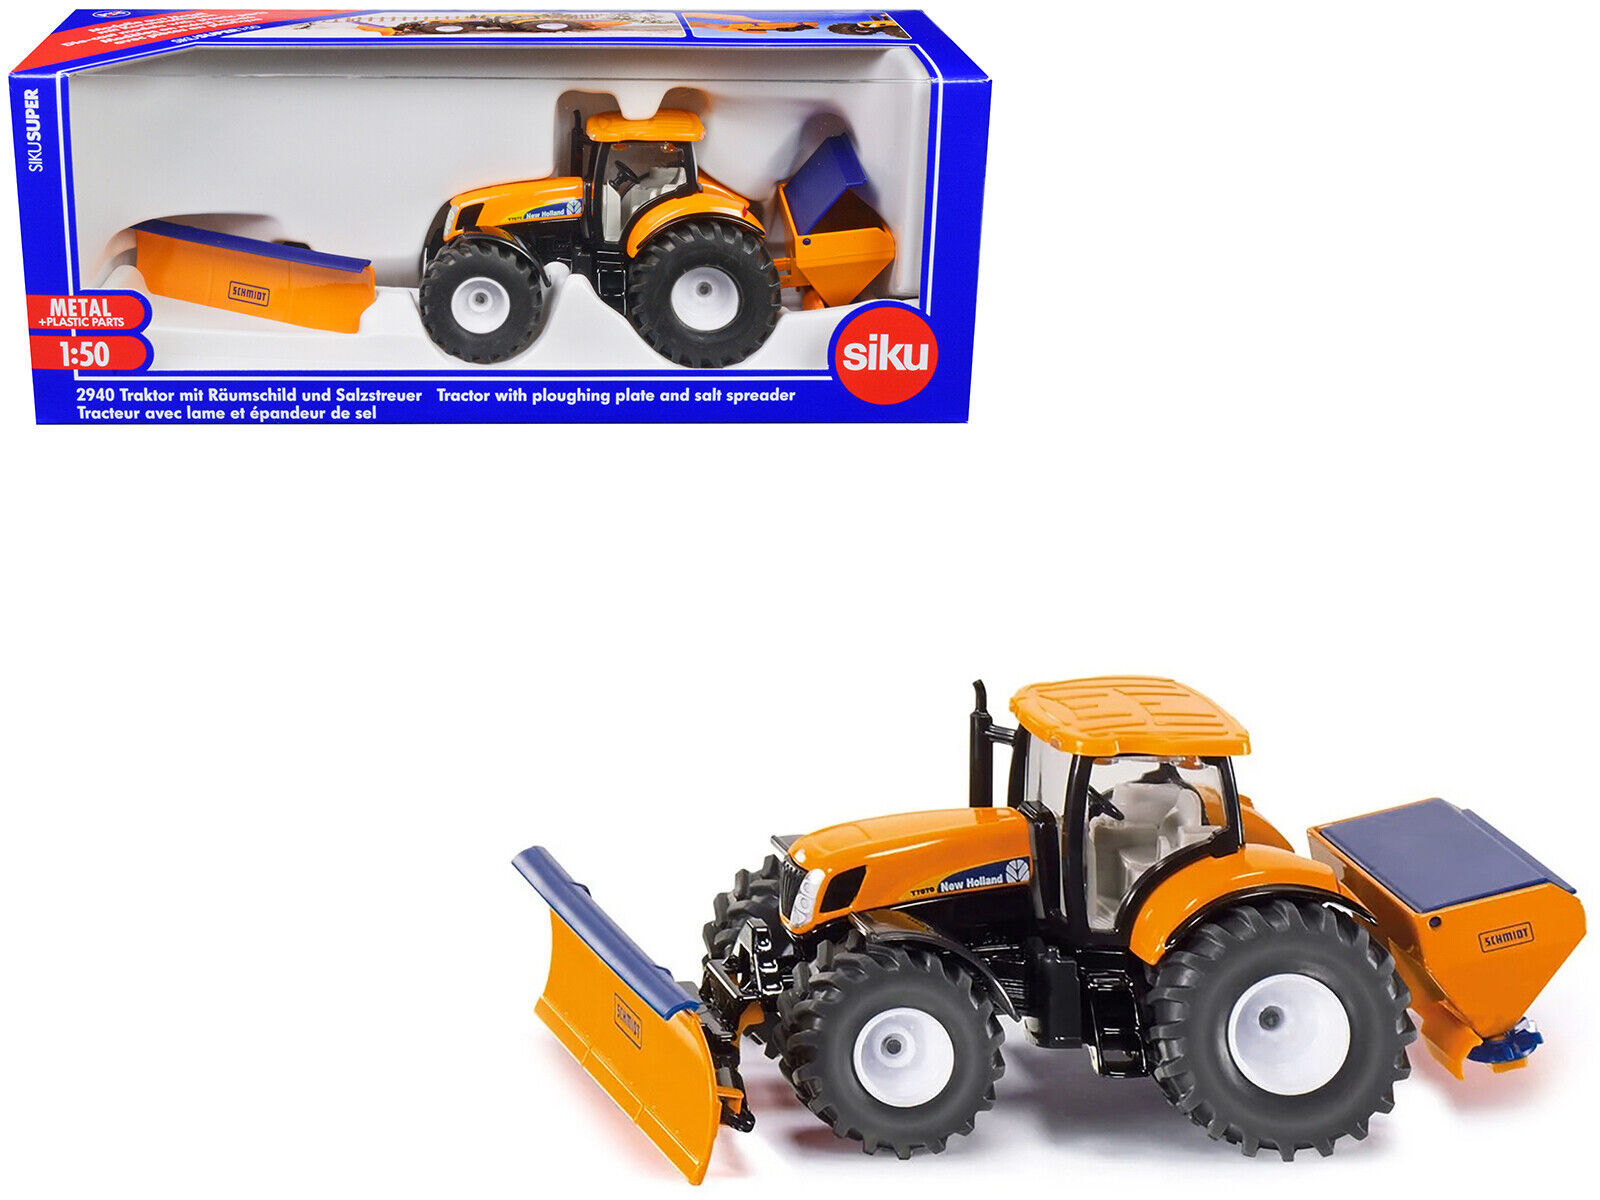 New Holland T7070 Tractor w Ploughing Plate Salt Spreader Yellow 1/50 Diecast Mo - $42.25